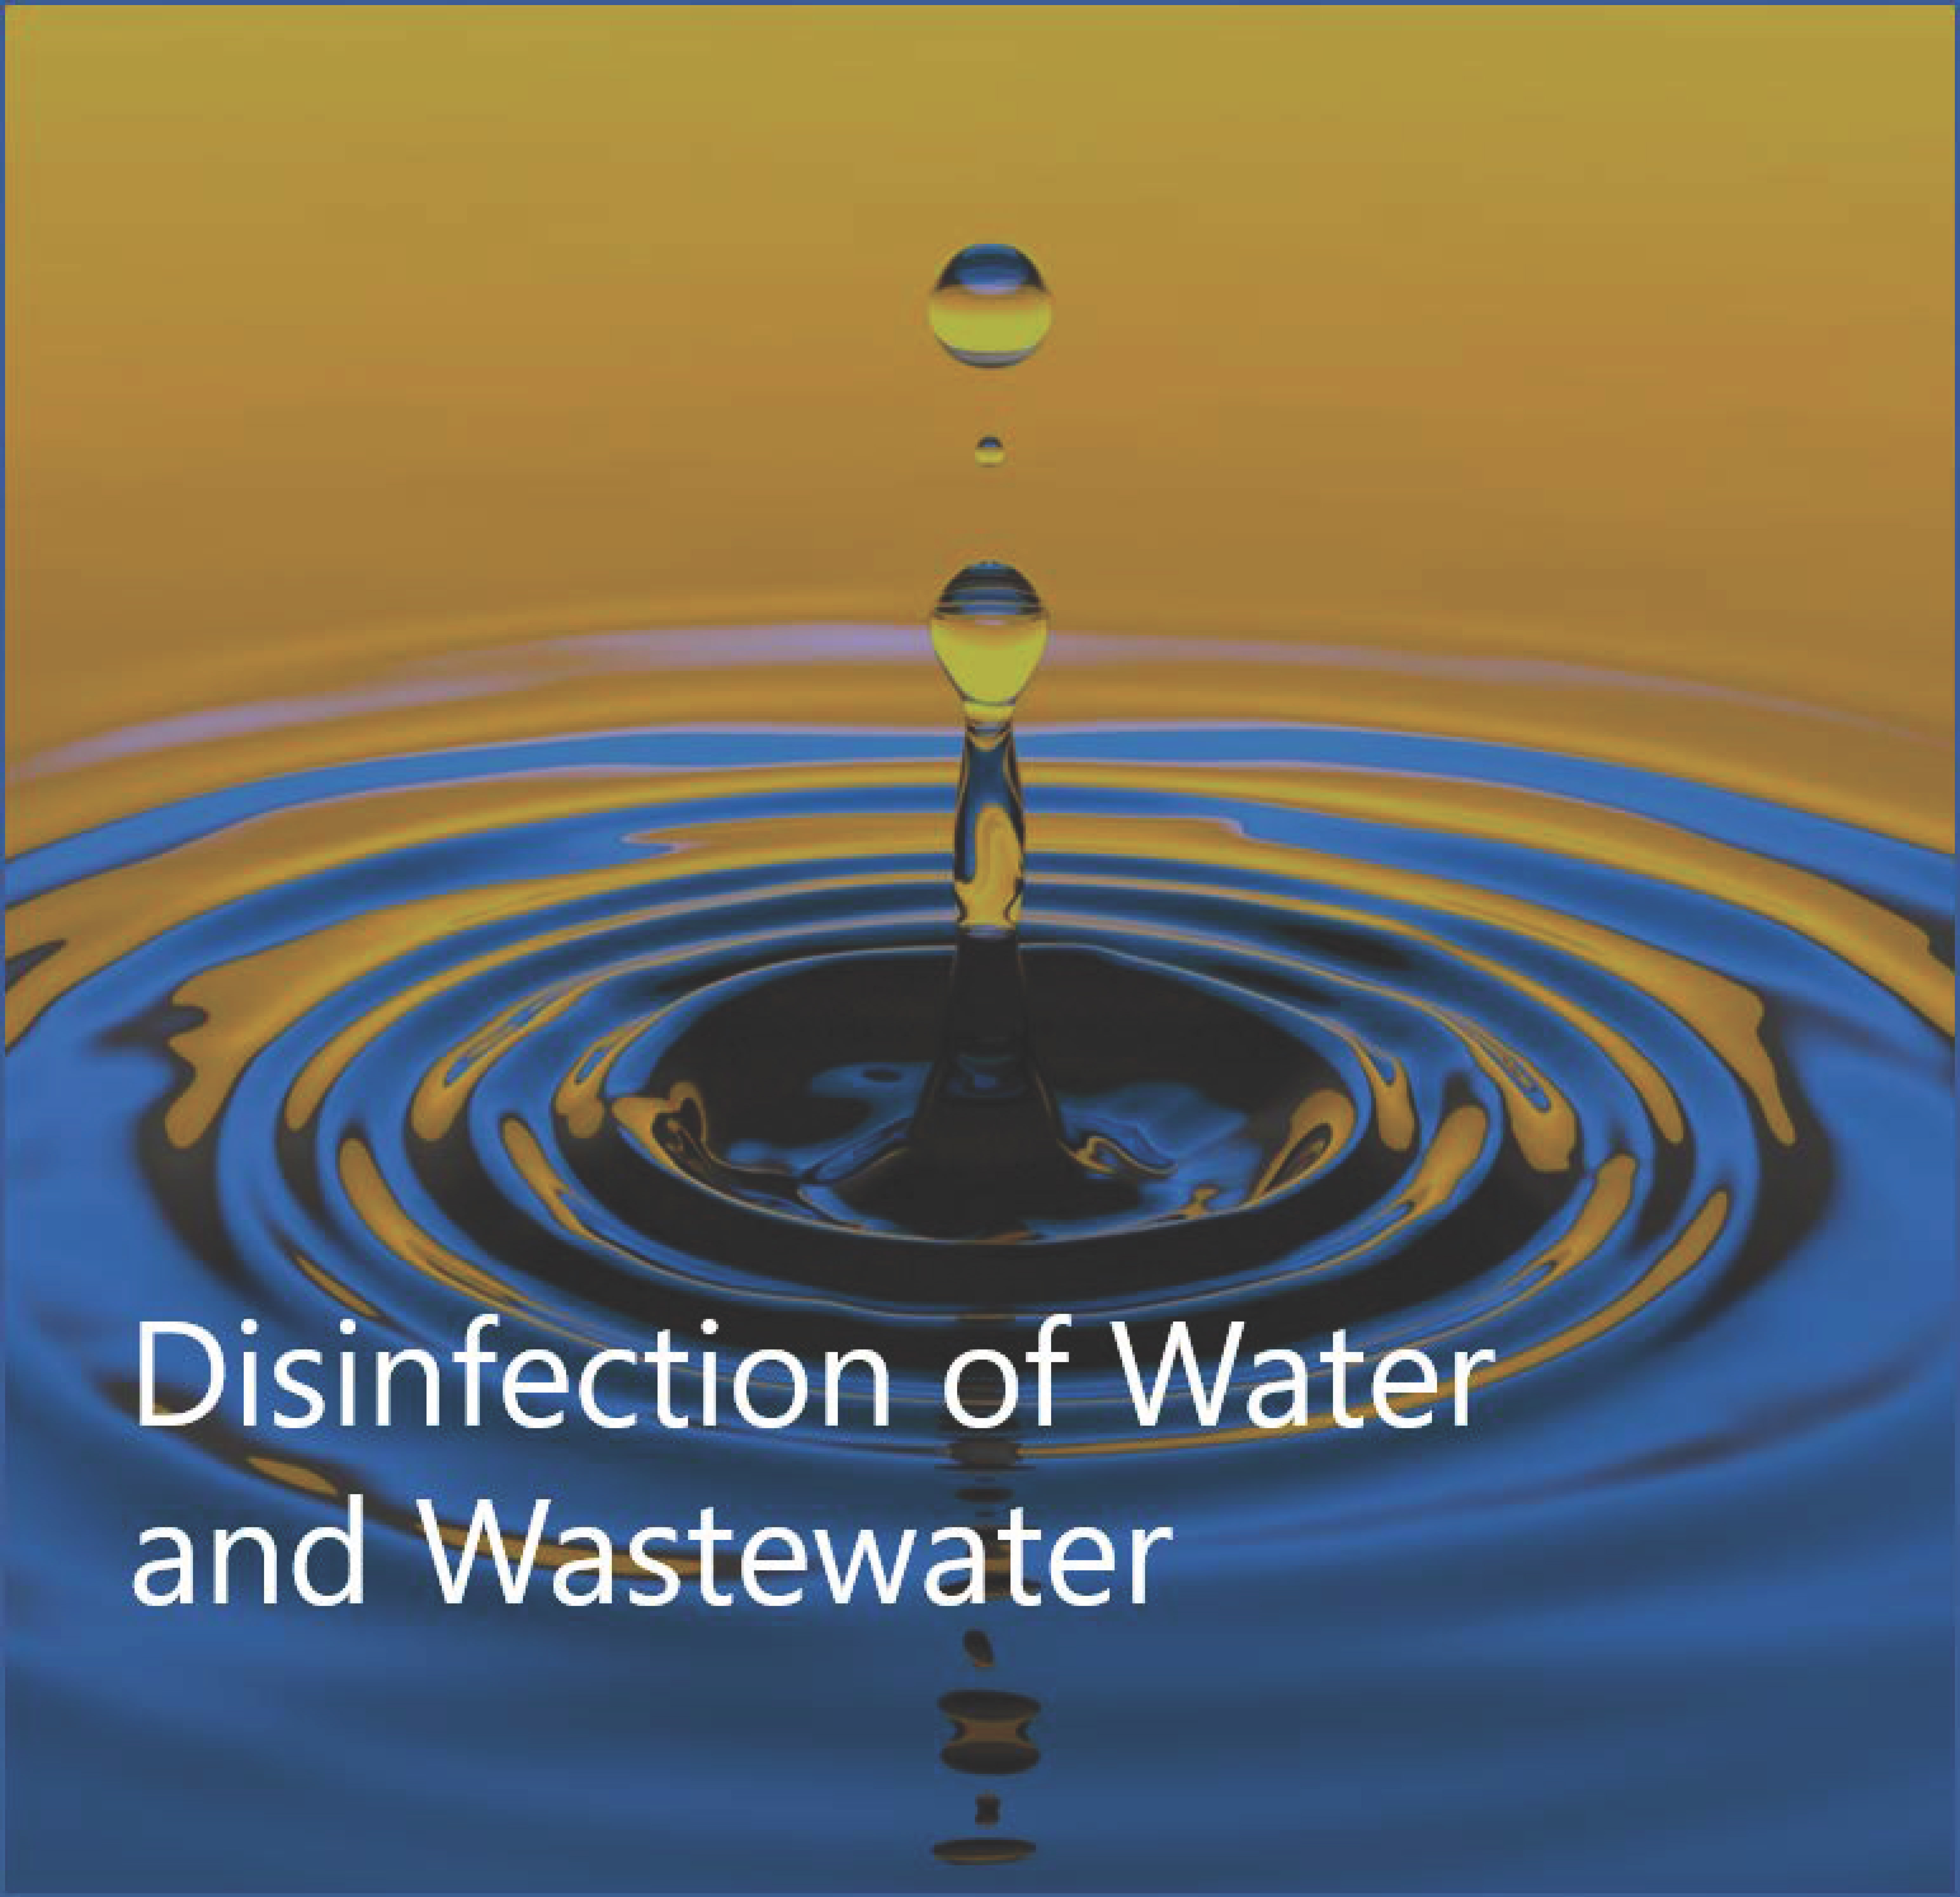 Disinfection of Water and Wastewater August 2021